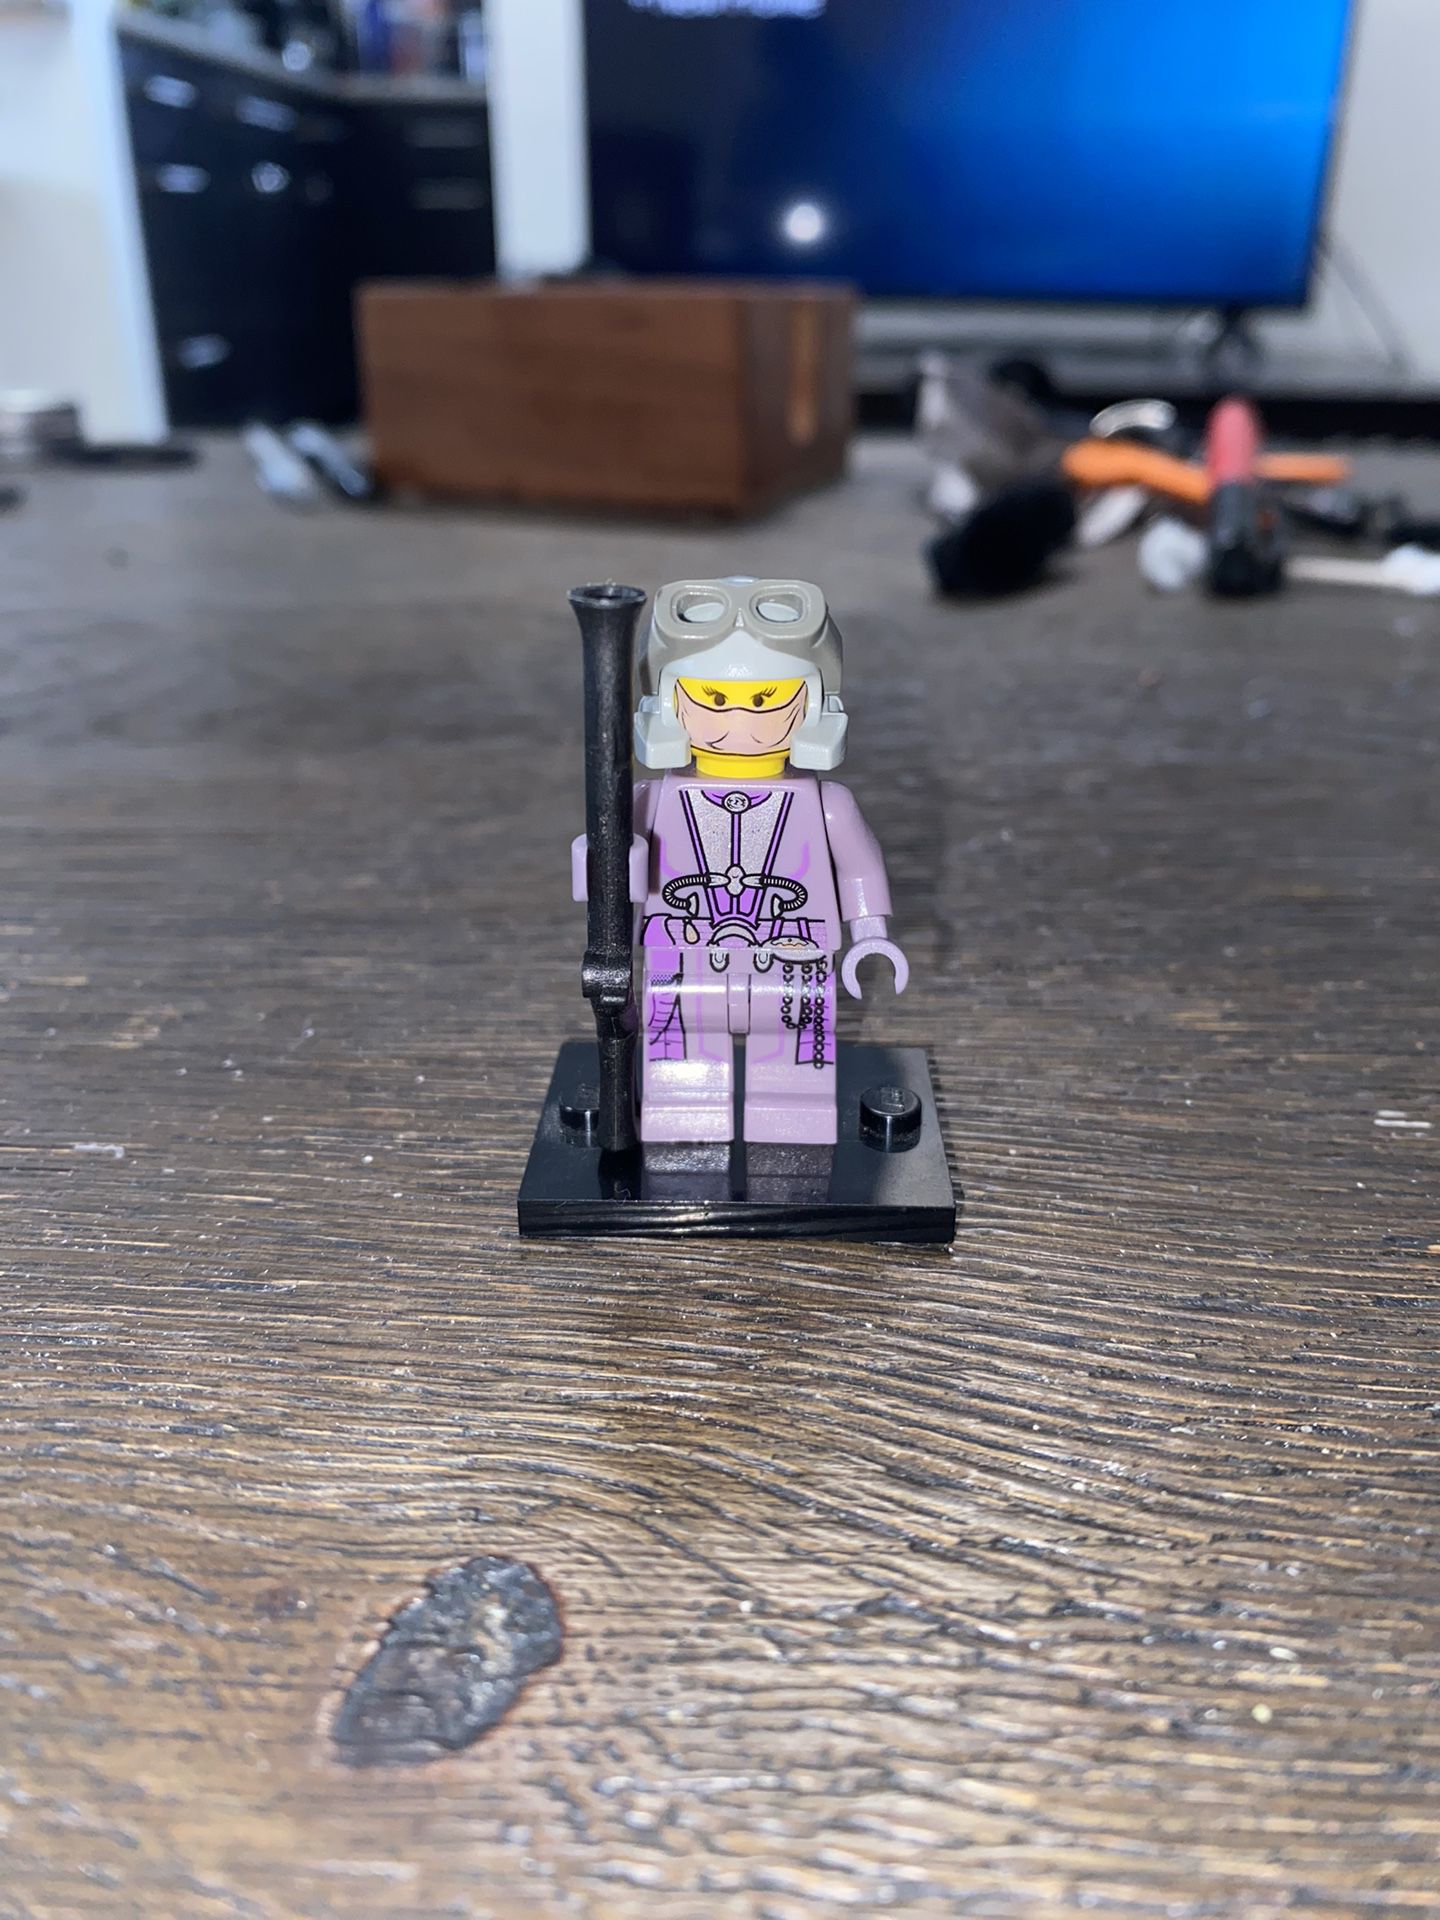 Lego Star Wars Zam Wessell Minifigure, EXCELLENT CONDITION